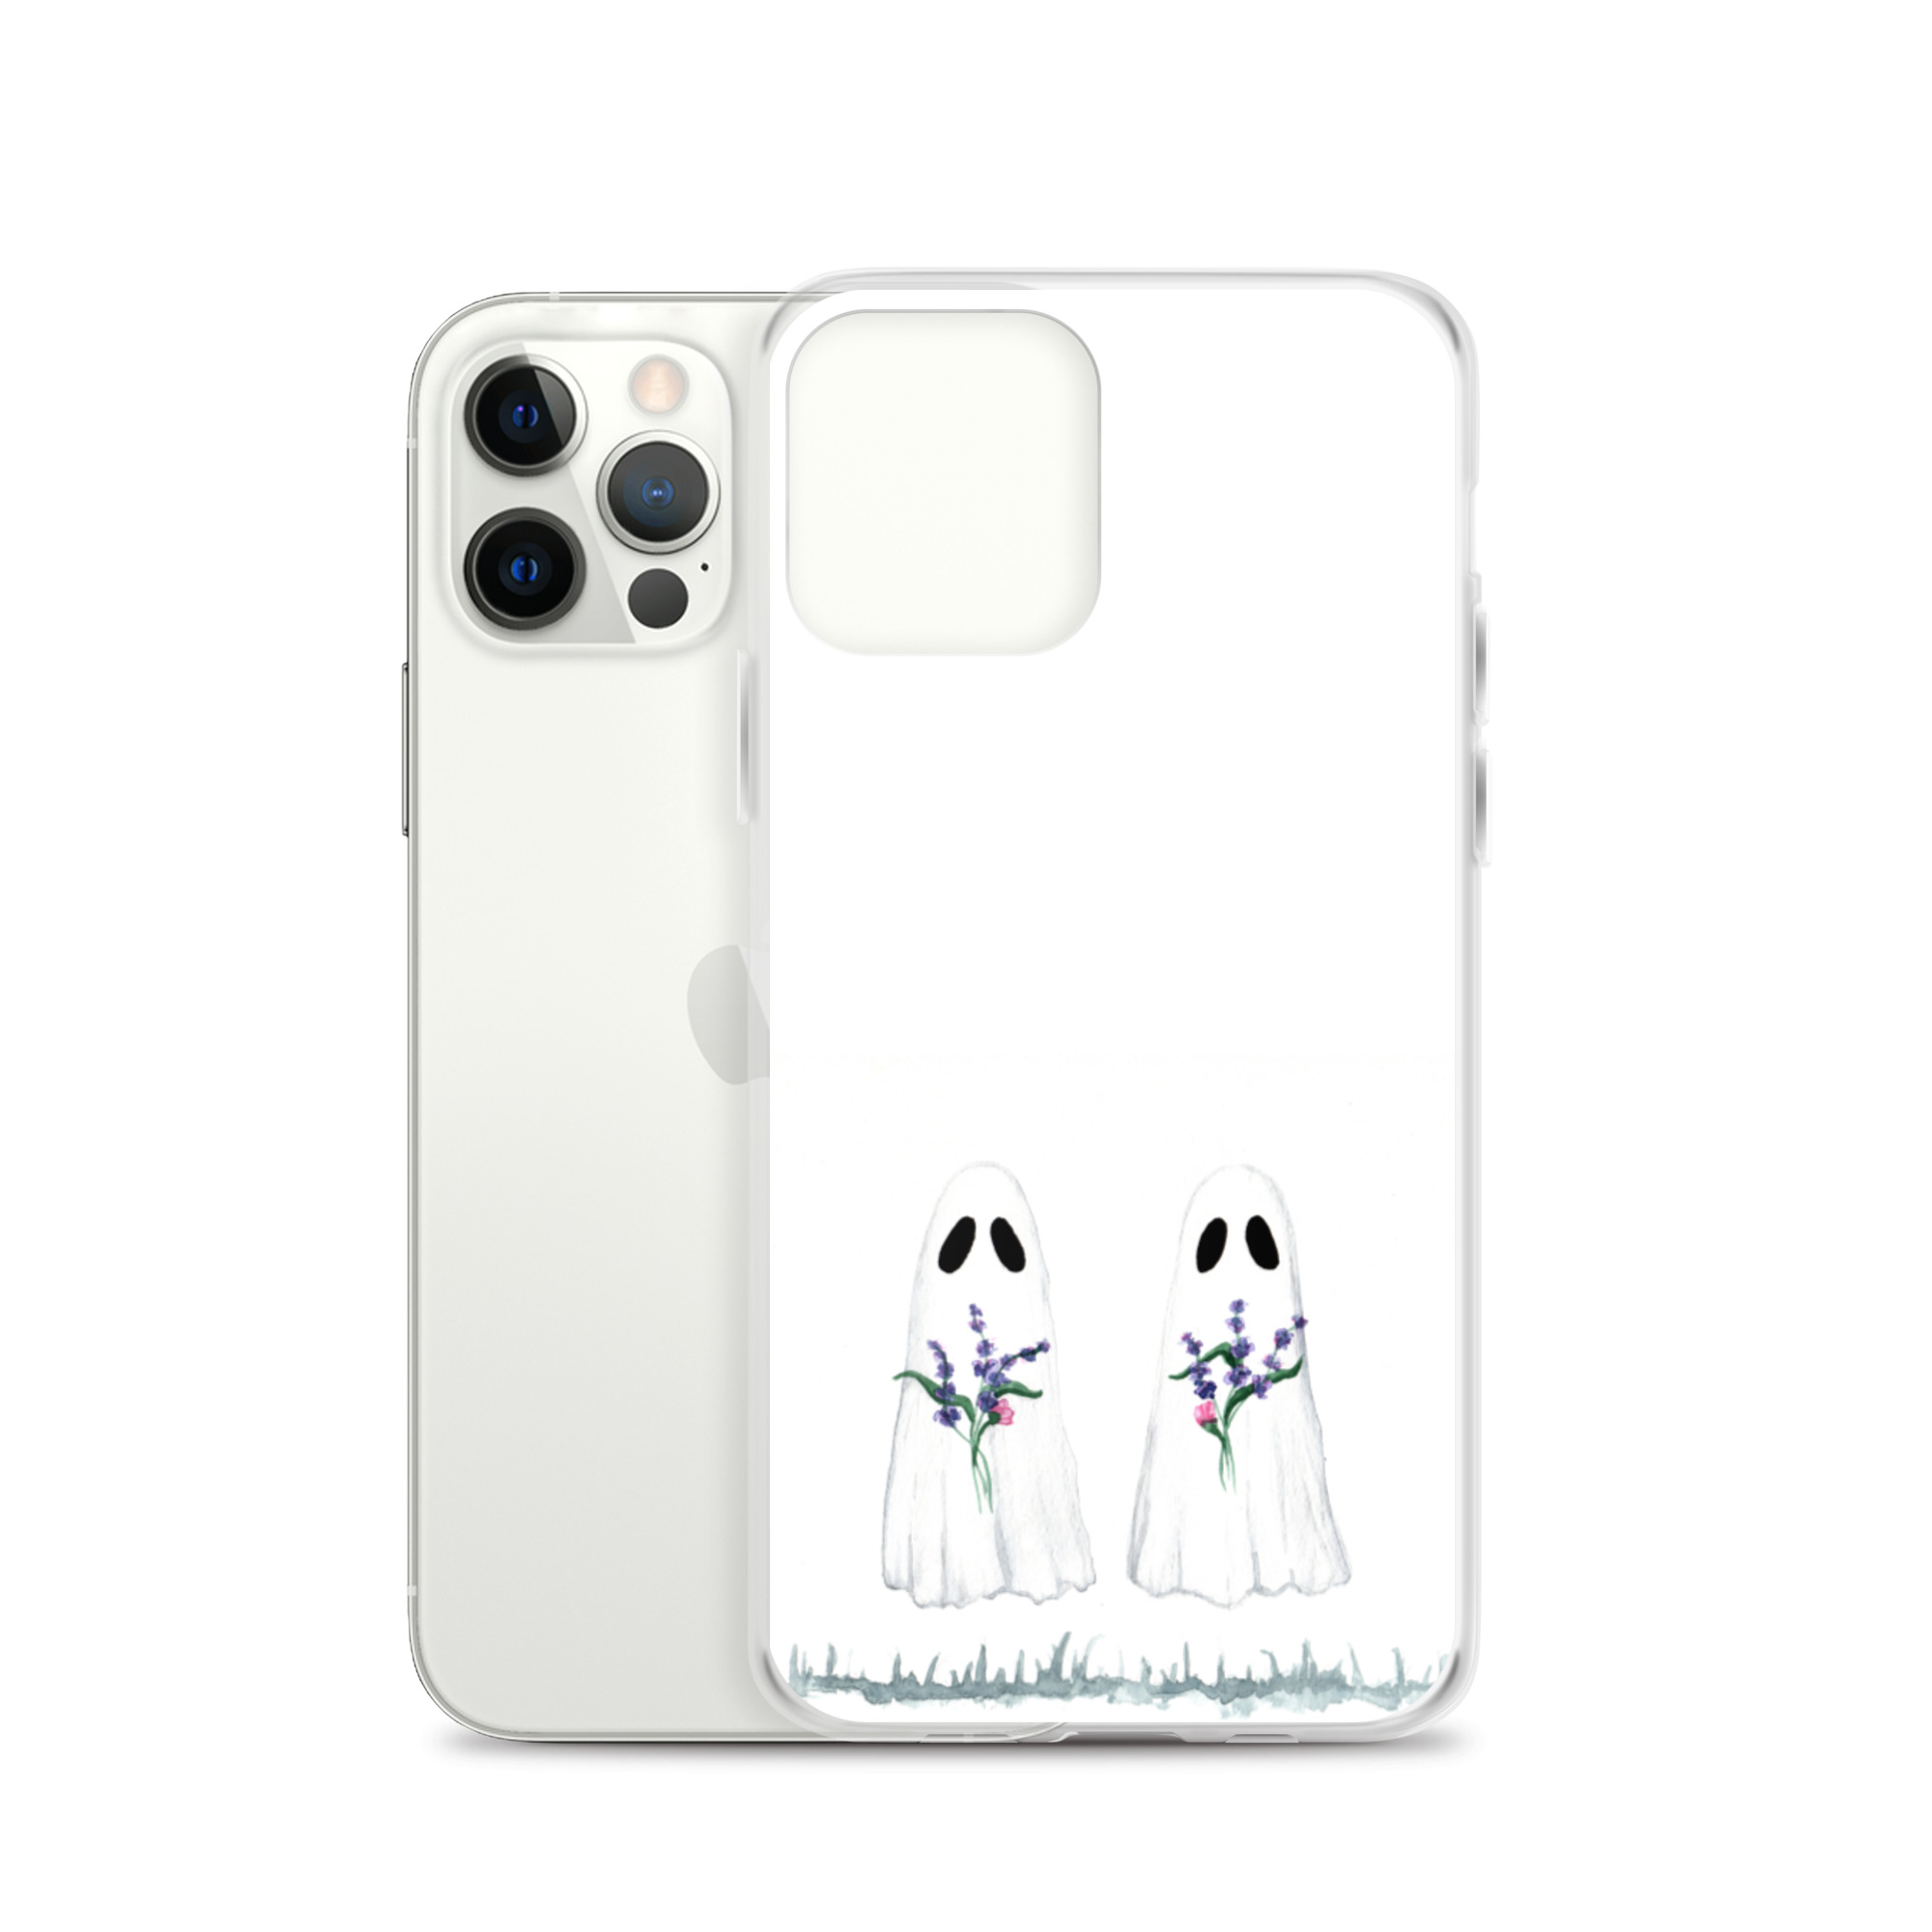 iphone-case-iphone-12-pro-case-with-phone-62f1597502651.jpg